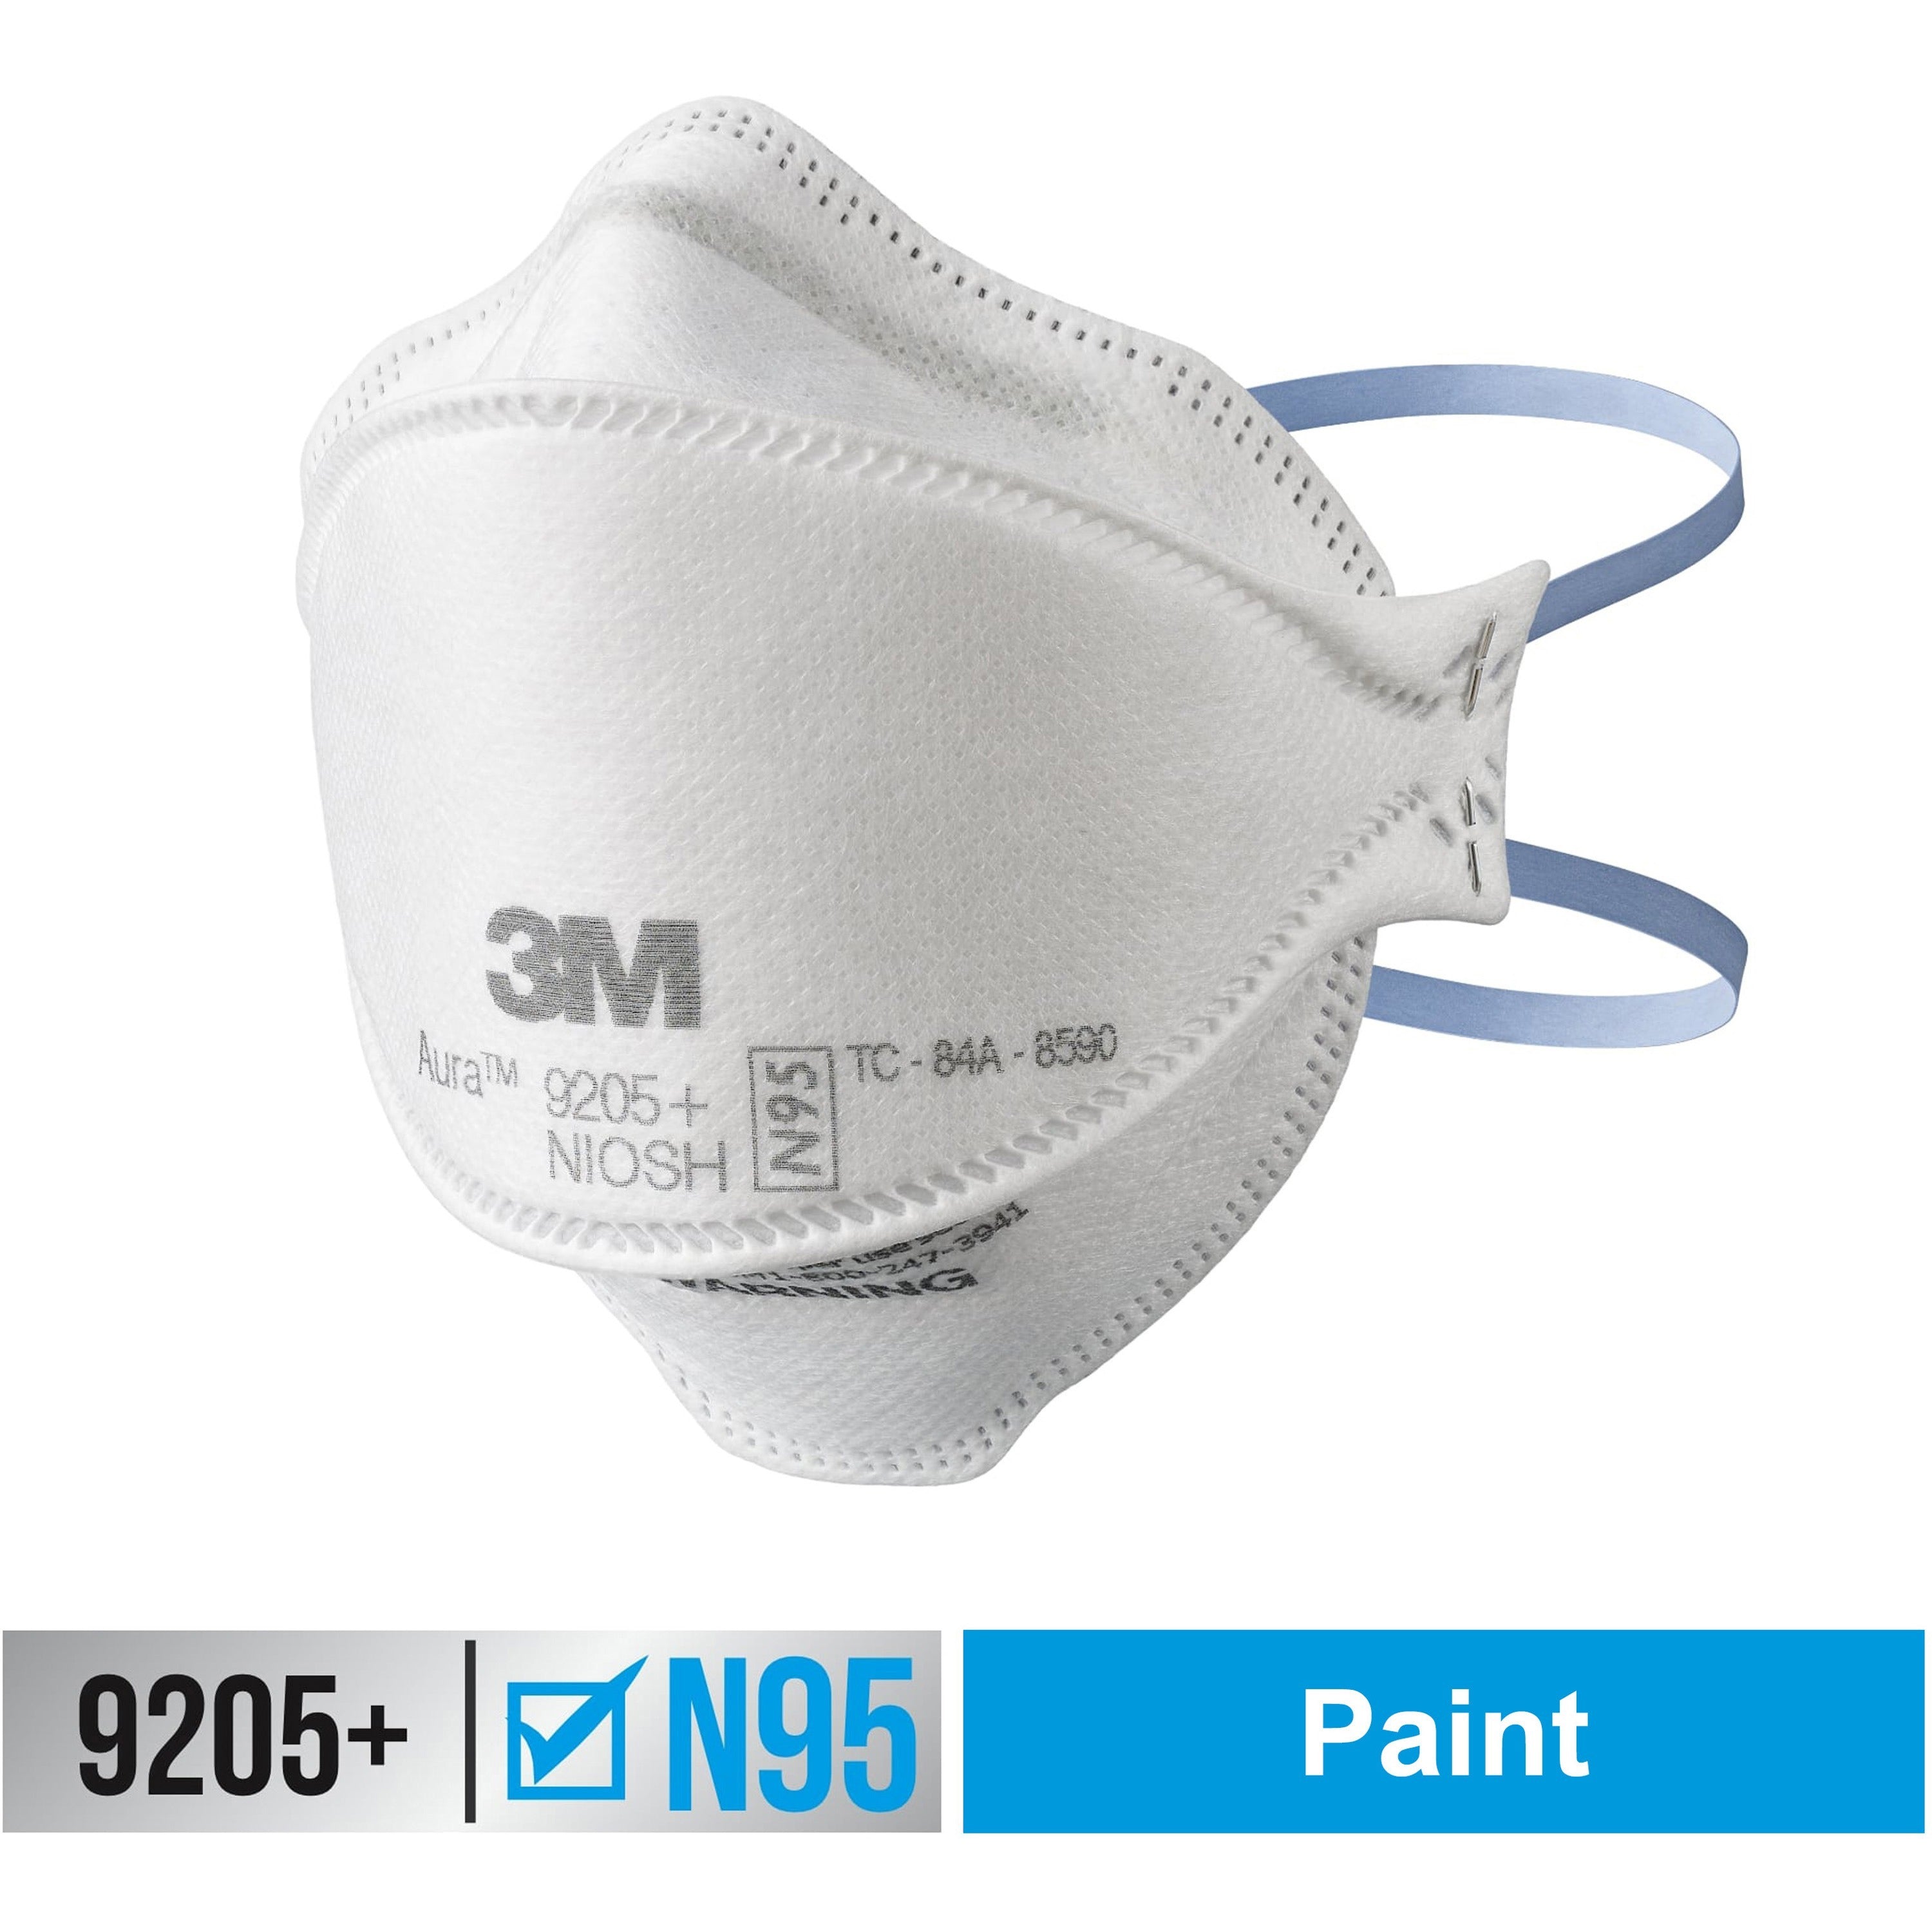 3m-aura-n95-particulate-respirator-9205-recommended-for-face-adult-size-airborne-particle-dust-contaminant-fog-protection-white-lightweight-soft-comfortable-adjustable-nose-clip-disposable-advanced-electret-media-10-pack_mmm9205p10dc - 1